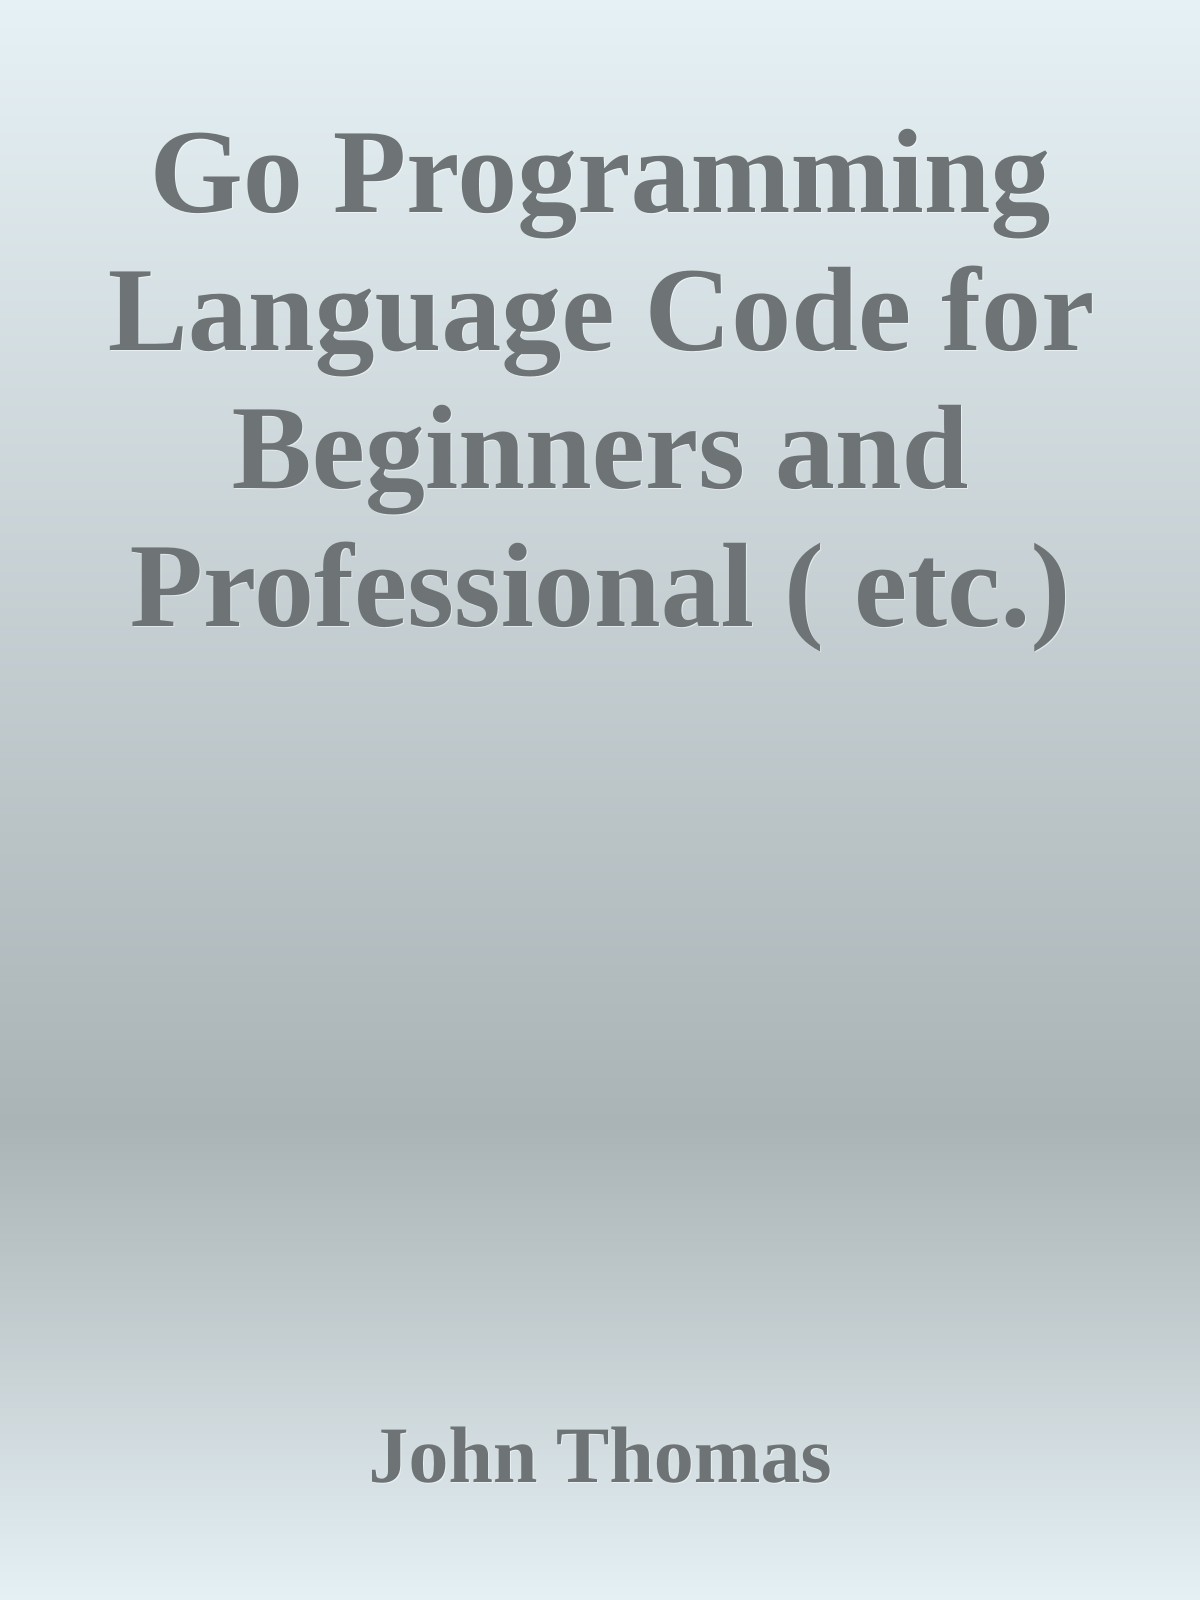 Go Programming Language Code for Beginners and Professional ( etc.)